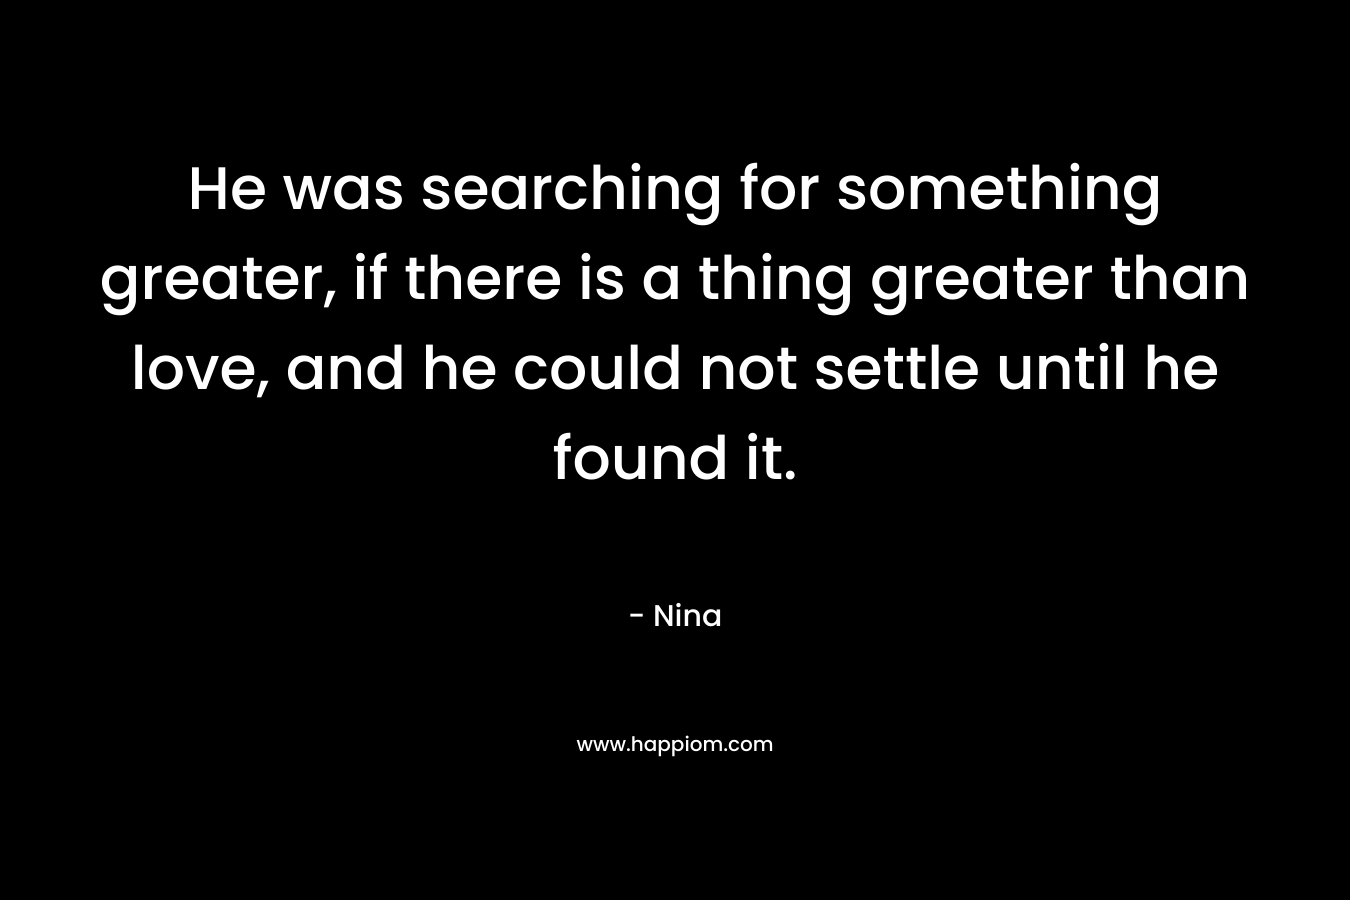 He was searching for something greater, if there is a thing greater than love, and he could not settle until he found it. – Nina